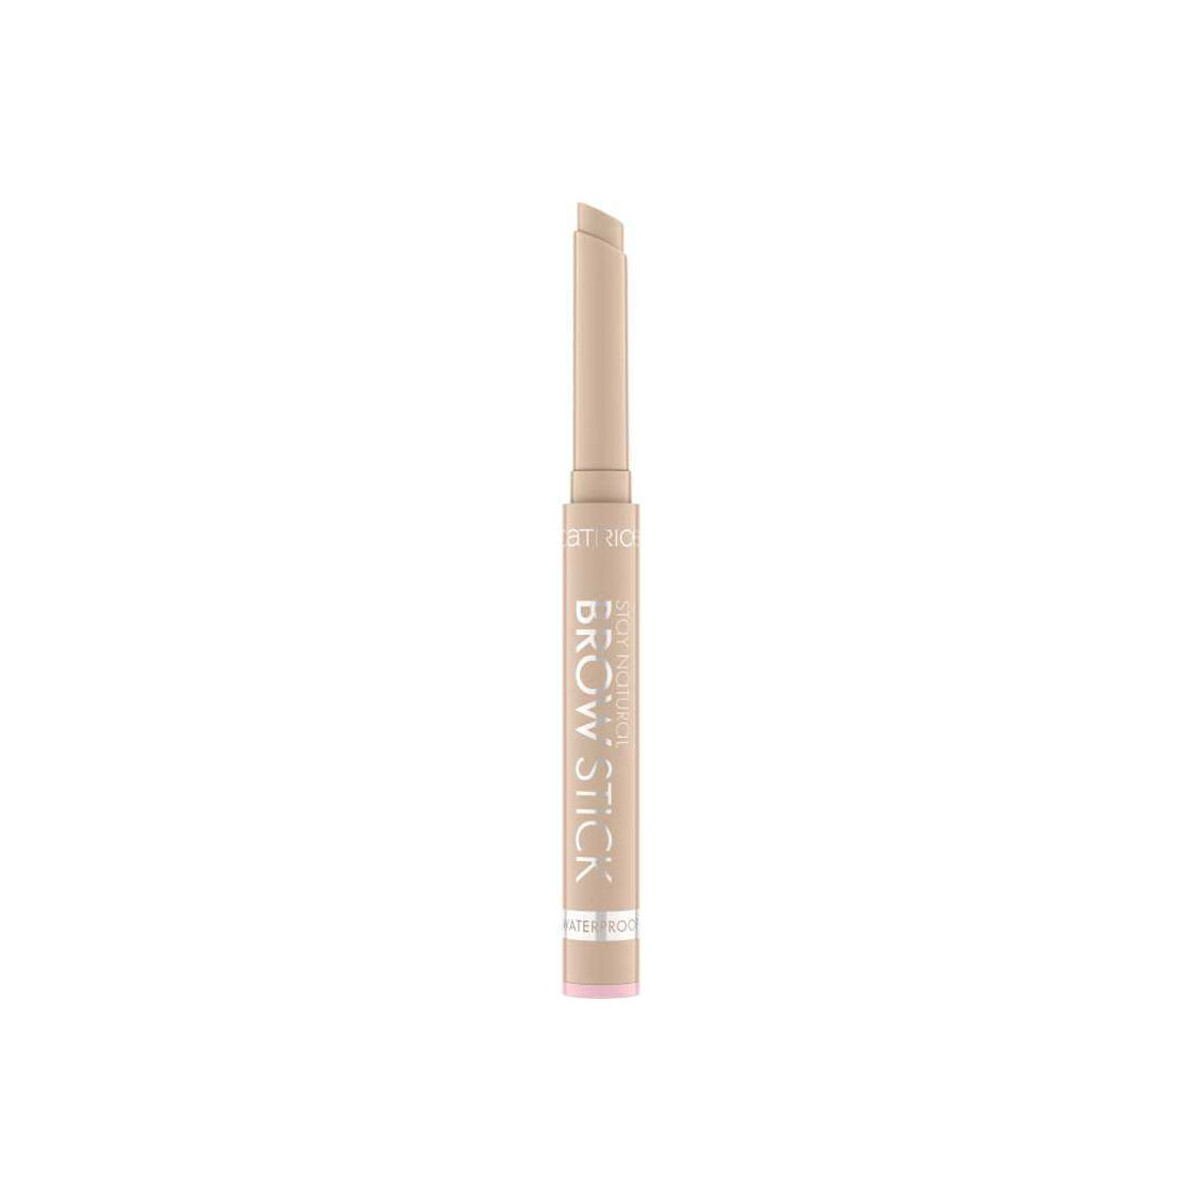 Belleza Mujer Perfiladores cejas Catrice Brow Stick Stay Natural 010-soft Blonde 1 Gr 